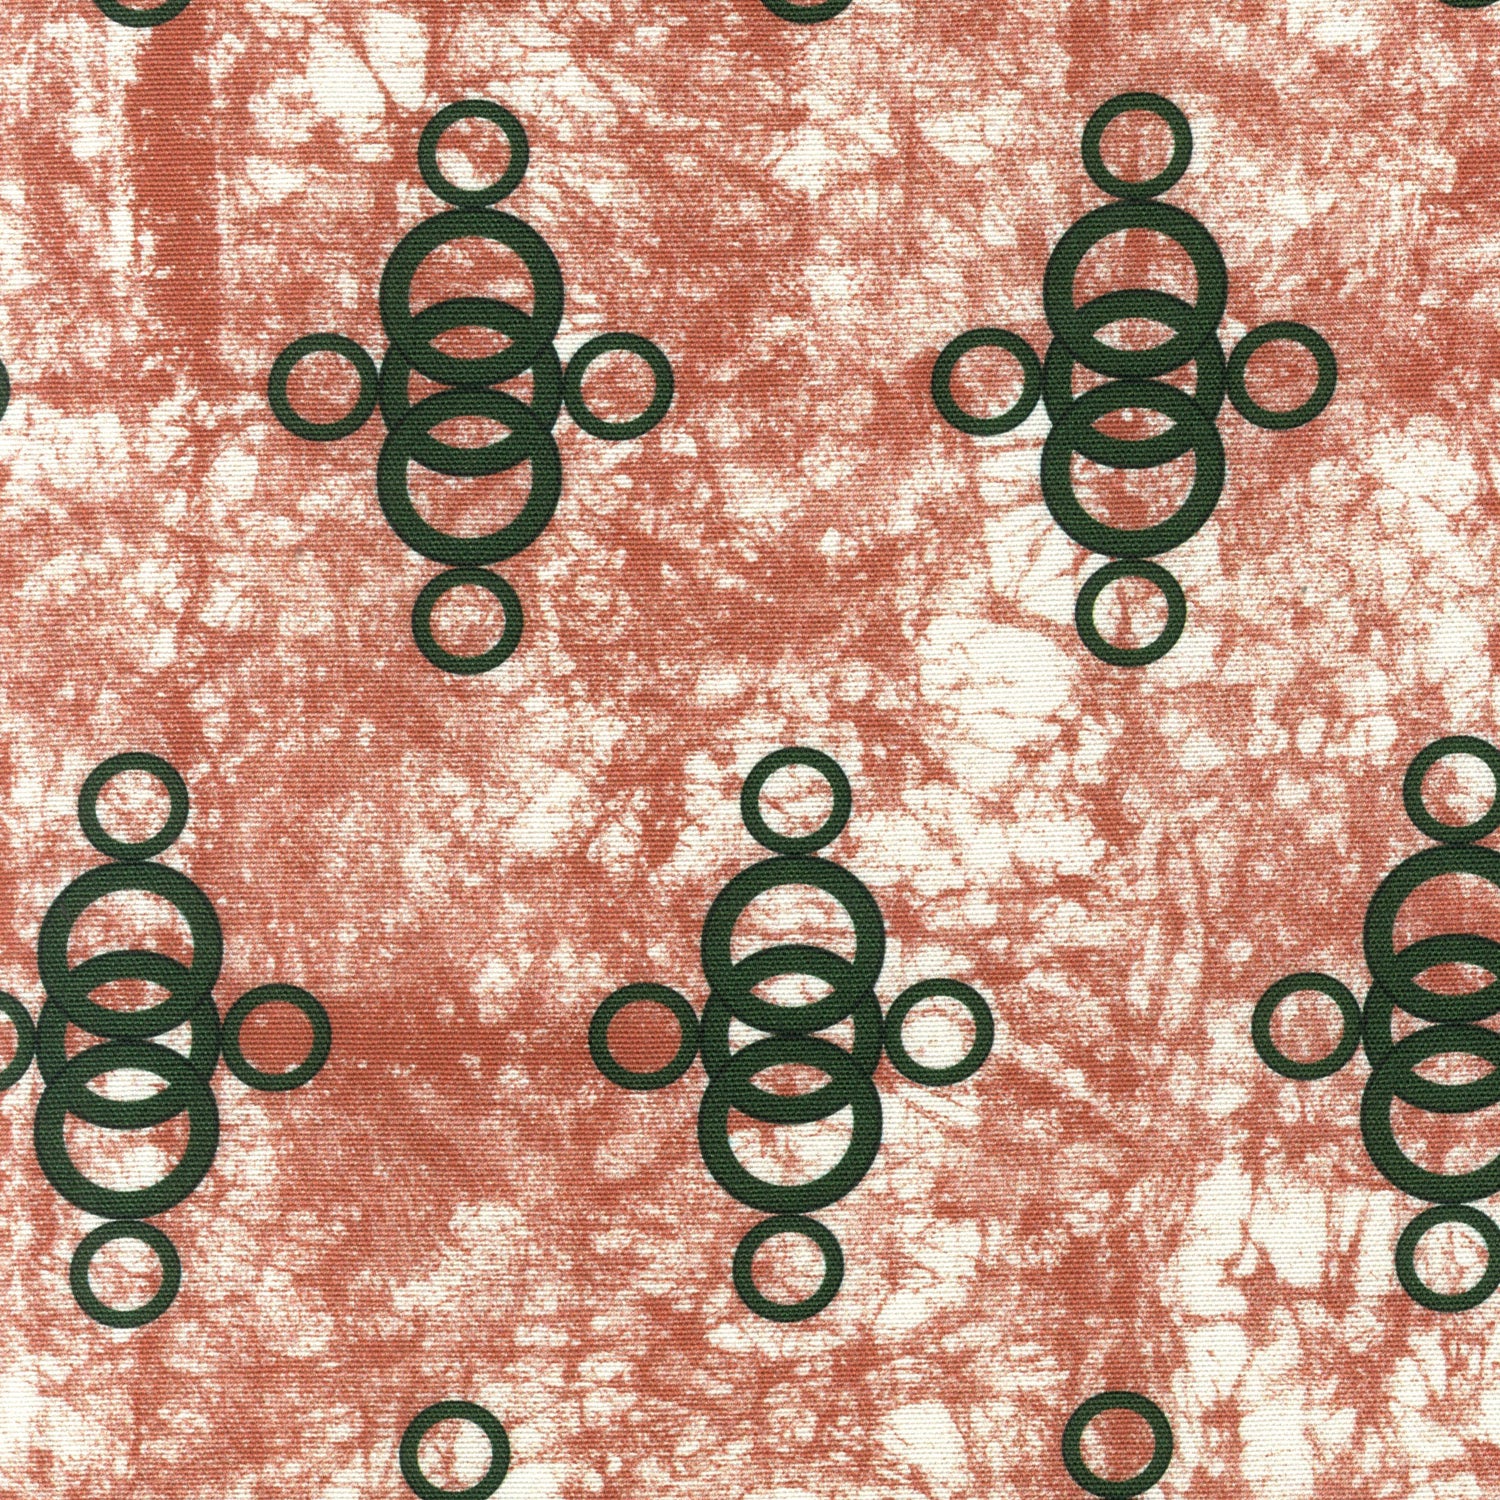 Detail of fabric in a curving lattice print in dark green on a mottled coral field.